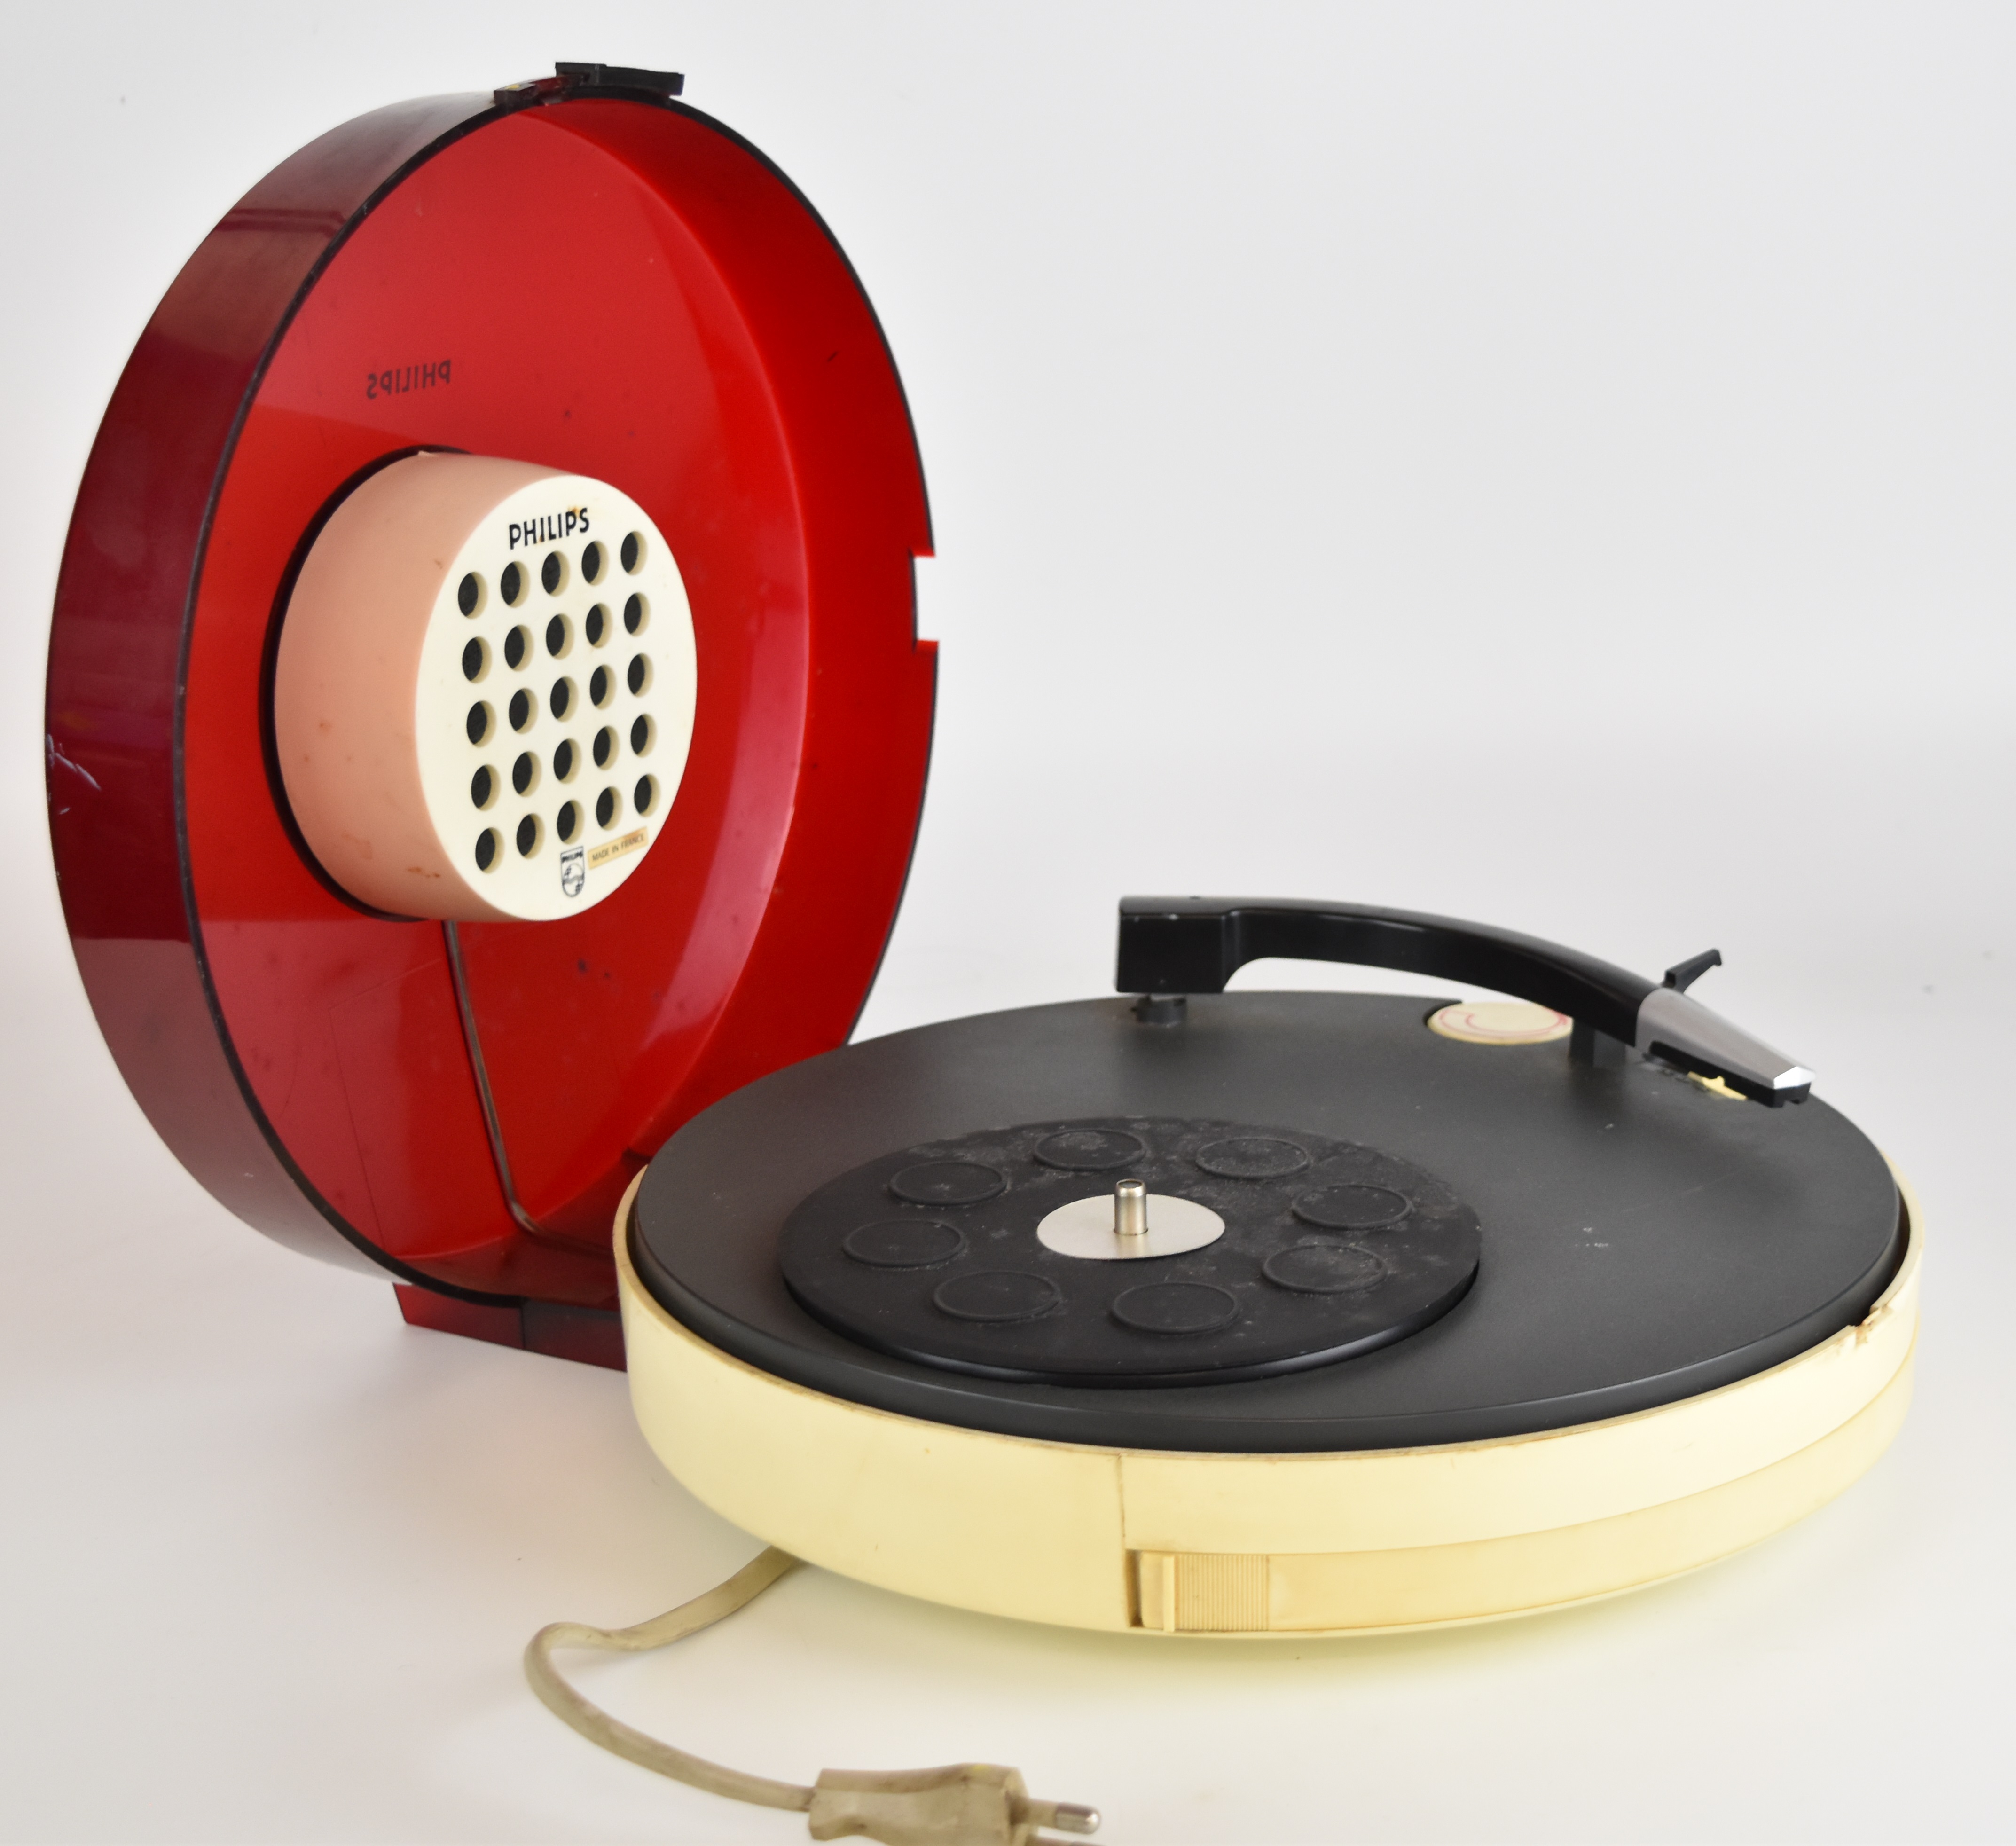 Philips retro UFO record player, model 22GF303/15L, with red plastic cover incorporating speaker - Image 2 of 5